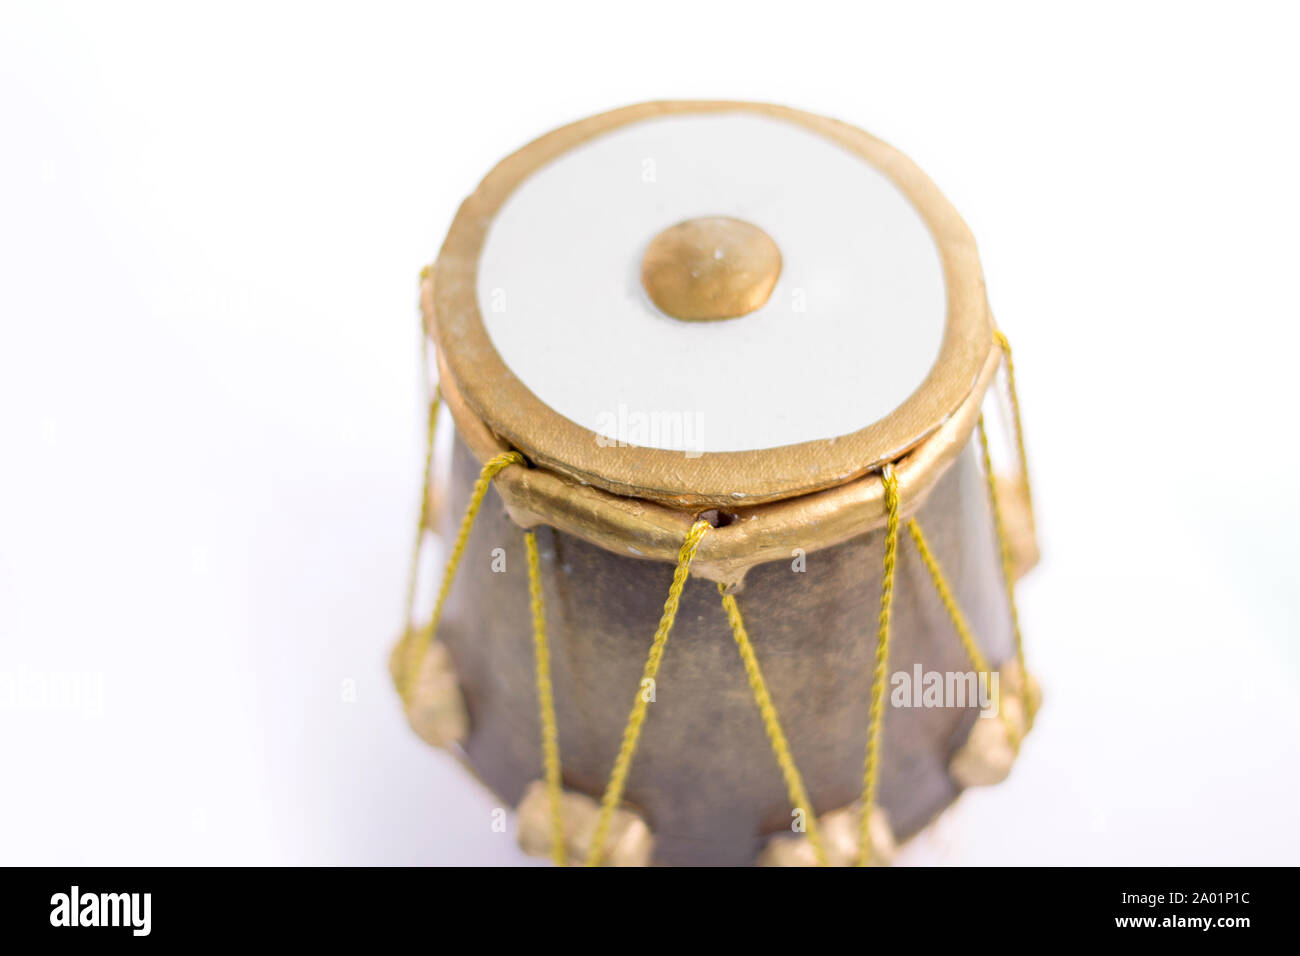 Picture of Musical Instrument Tabla Drum. Isolated on a white background. Stock Photo